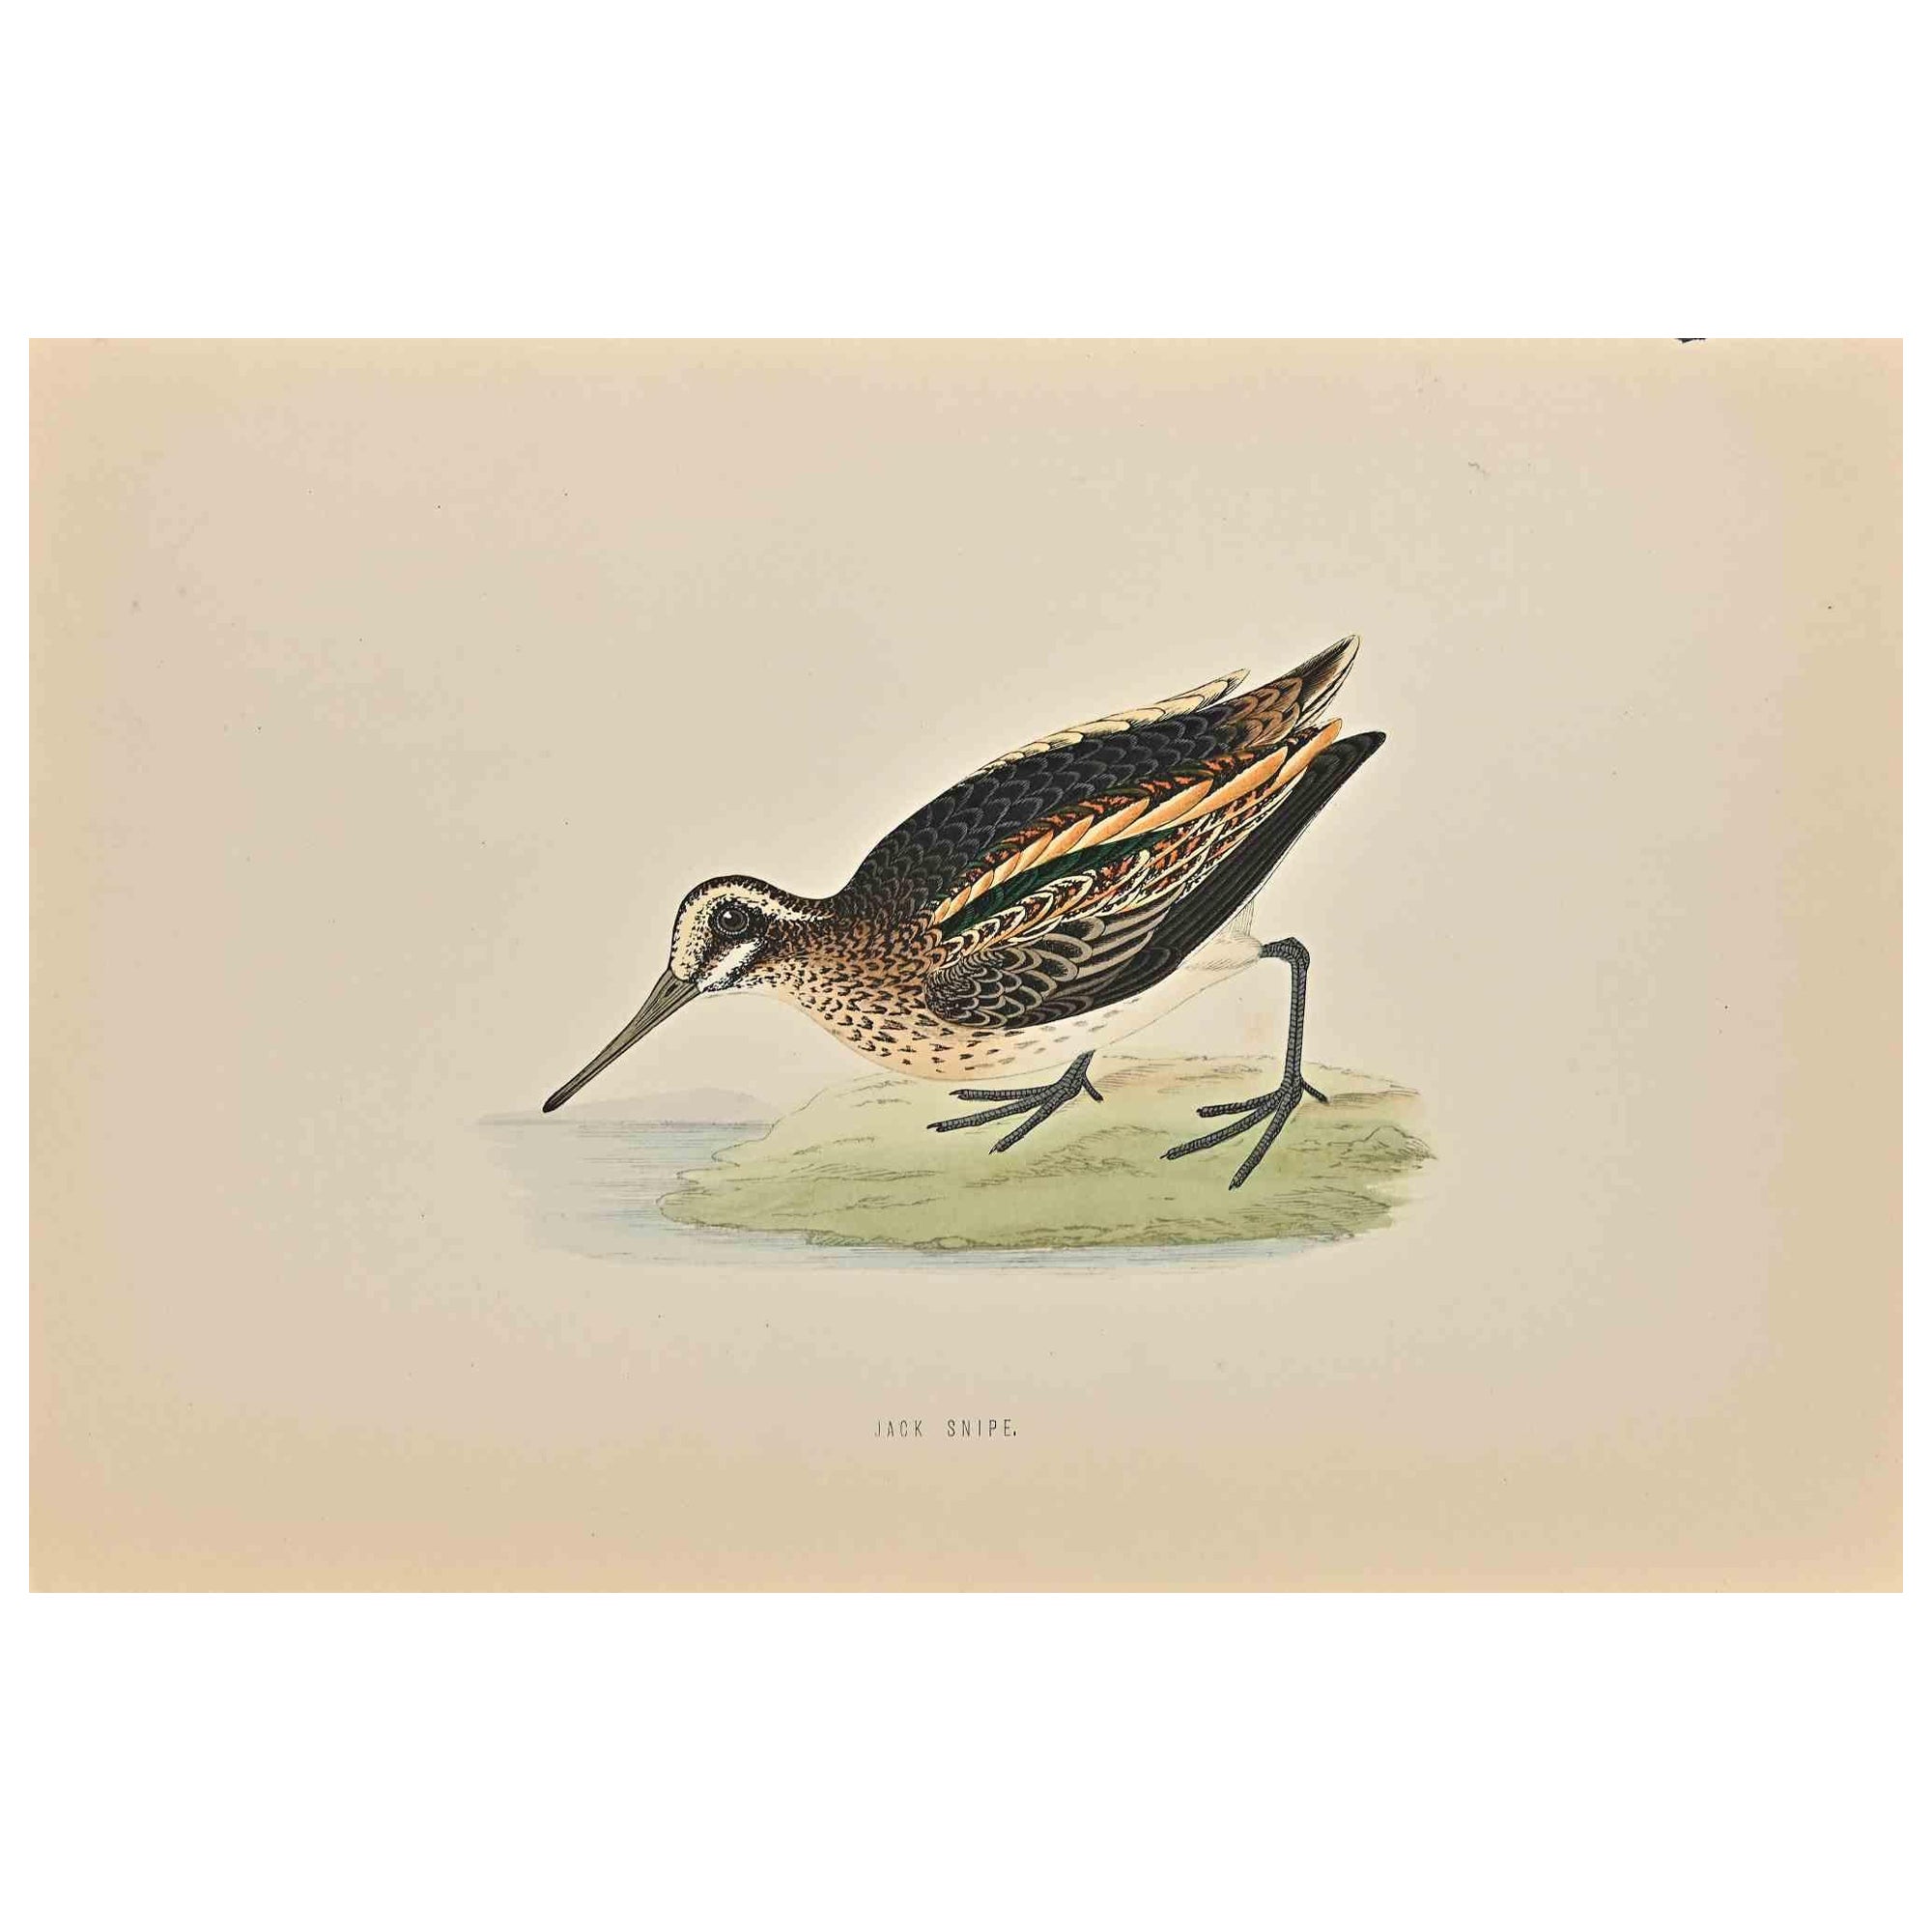 Jack Snipe is a modern artwork realized in 1870 by the British artist Alexander Francis Lydon (1836-1917) . 

Woodcut print on ivory-colored paper.

Hand-colored, published by London, Bell & Sons, 1870.  

The name of the bird is printed on the